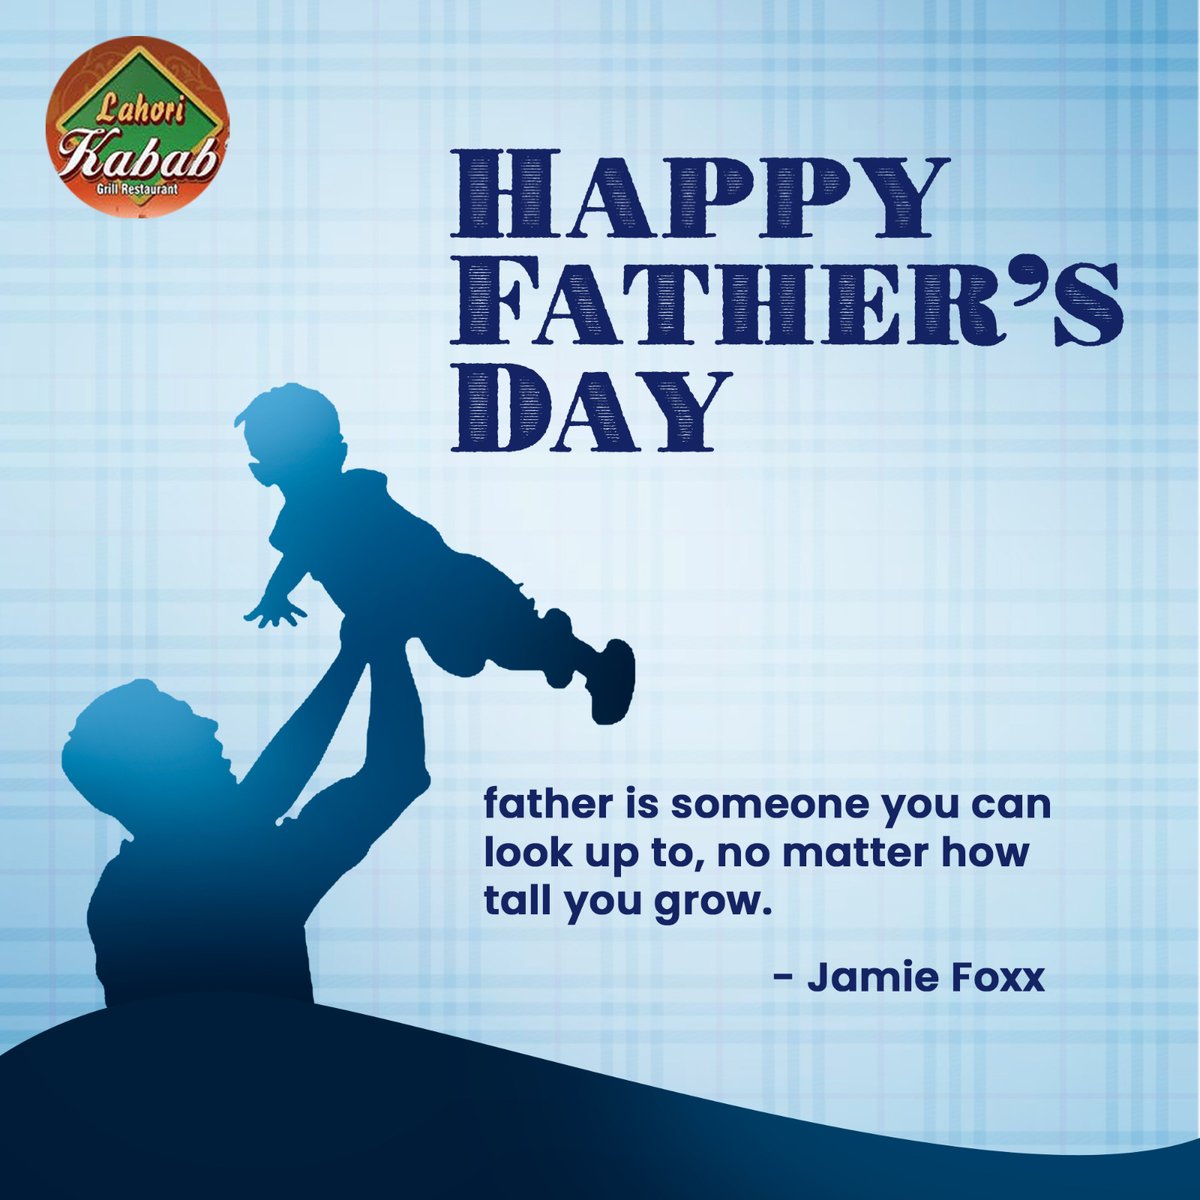 A father is someone you can look up to, no matter how tall you grow. 
- Jamie Foxx

#happyfathersday #fatherslove #dad #bestdadever #family #LotsOfLove #celebration #happymoments #fatherhood